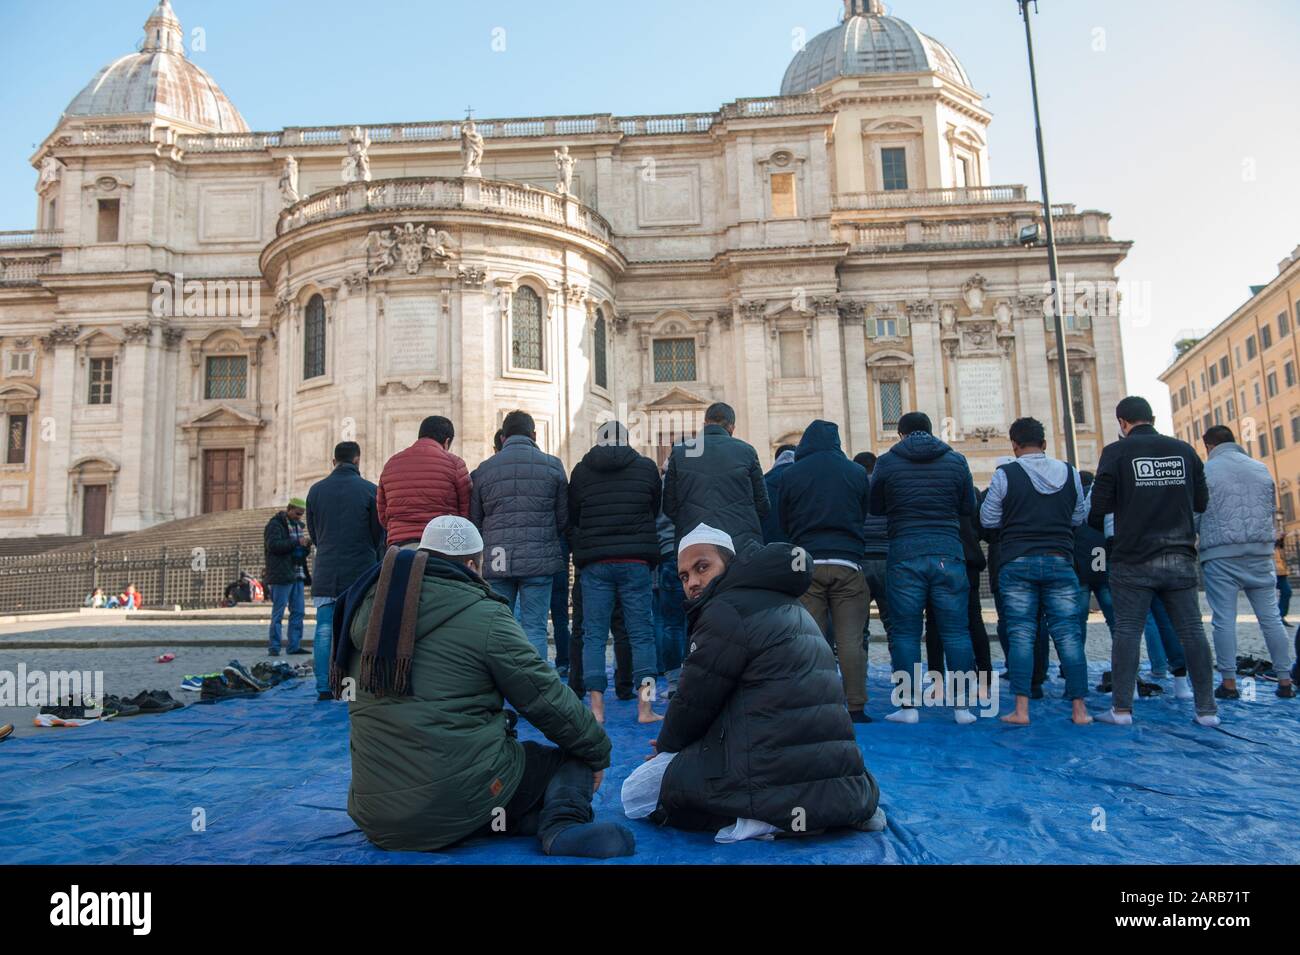 Rome, Italy. 17th Jan, 2020. Muslims attend Friday prayer during a demonstration in Esquilino Square in Rome, Italy. The Muslim community take to stre Stock Photo